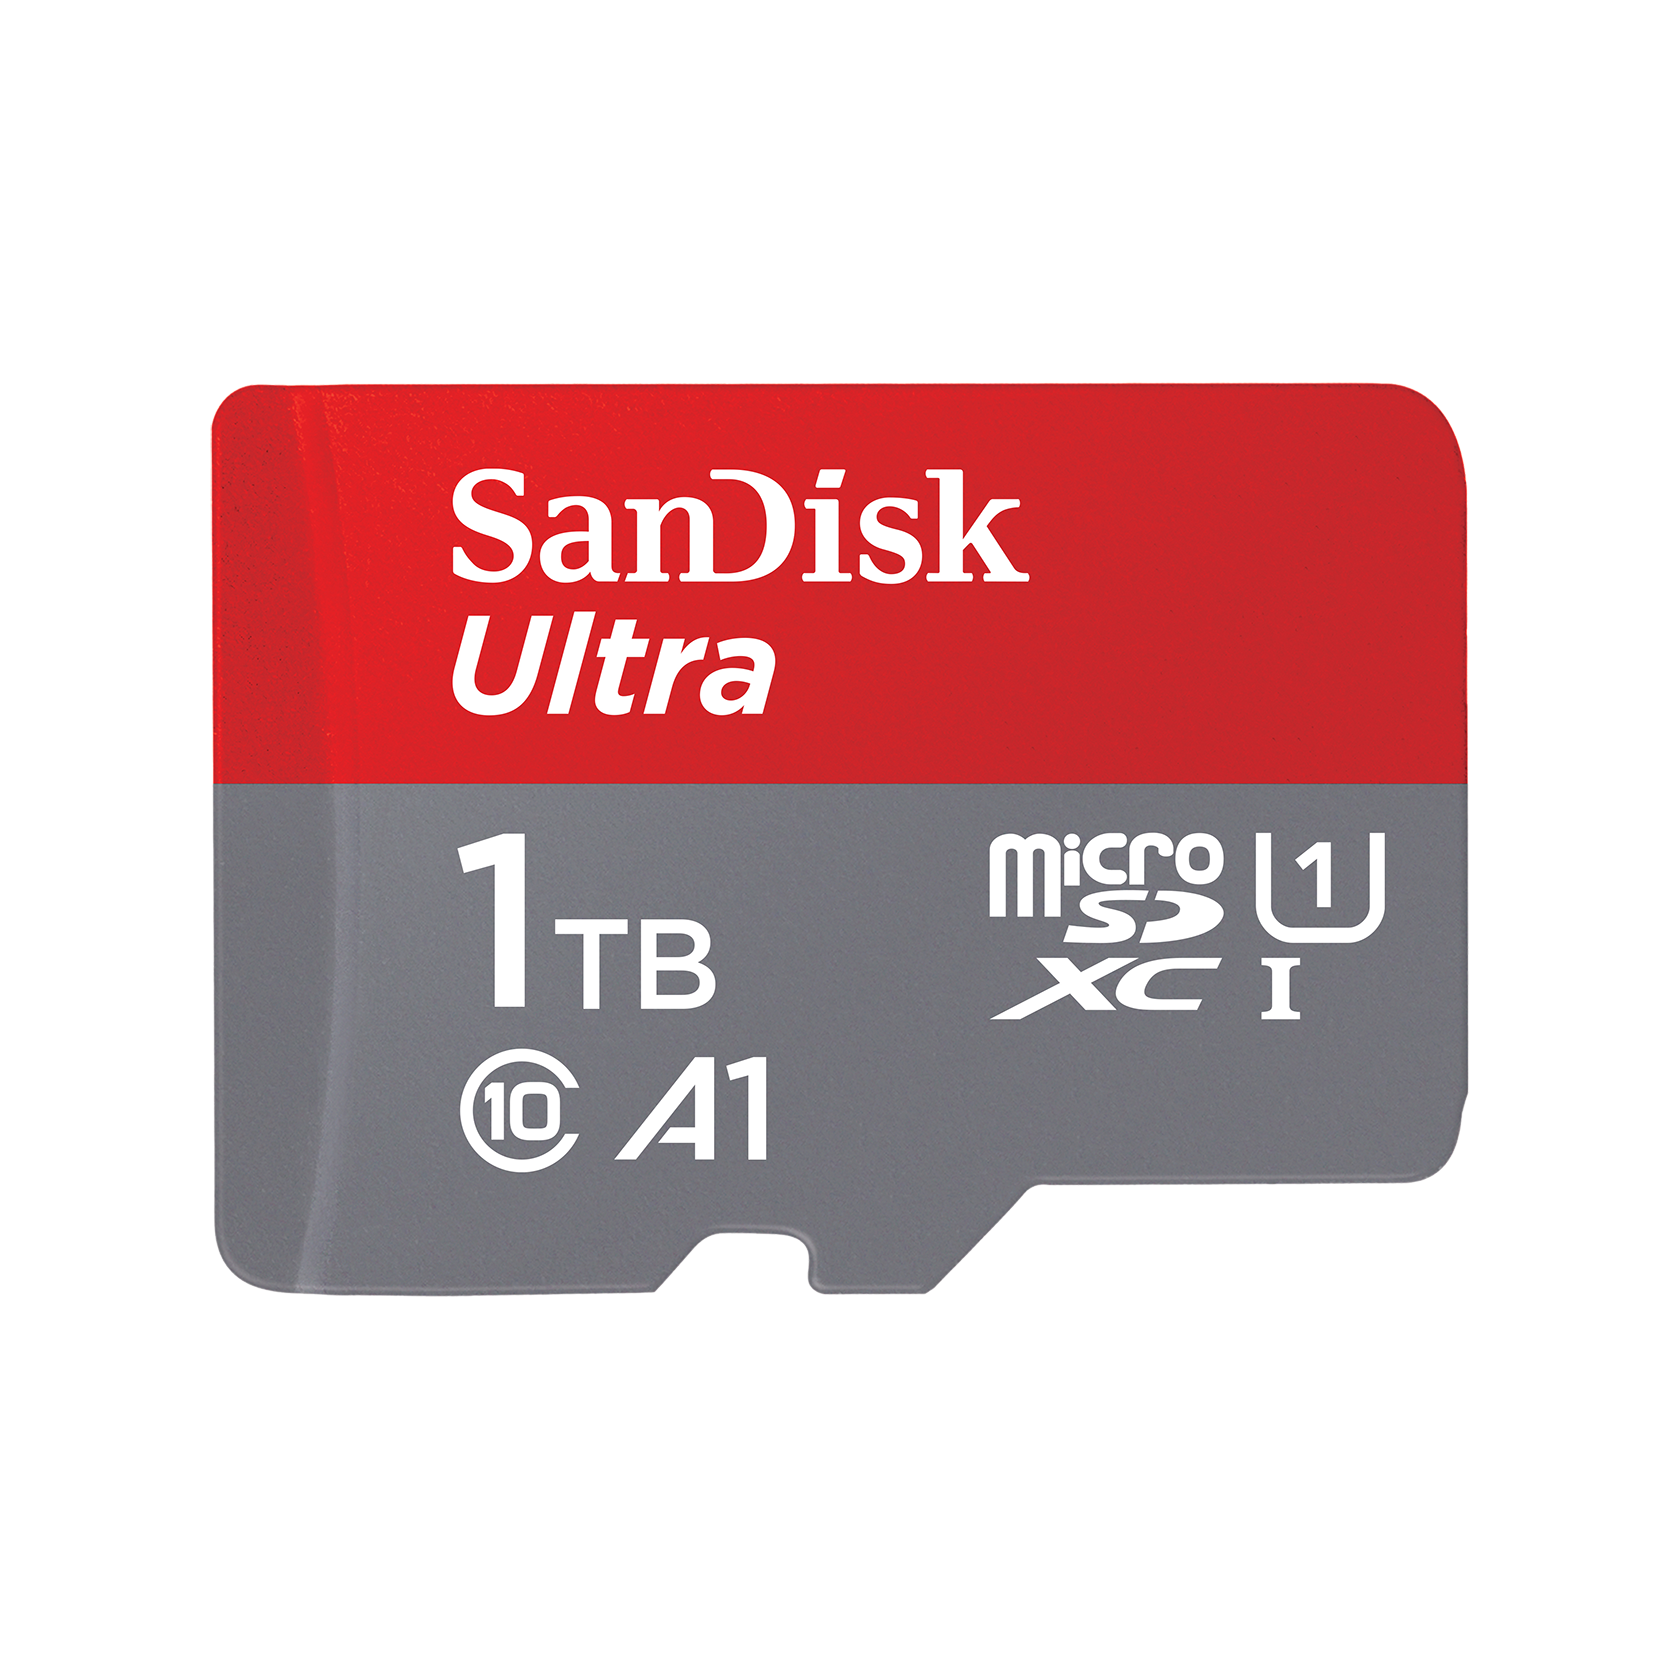 SanDisk 1TB Ultra® MicroSDXC™ UHS-I Card With Adapter - MicroSD Card - SDSQUAC-1T00-GN6MA